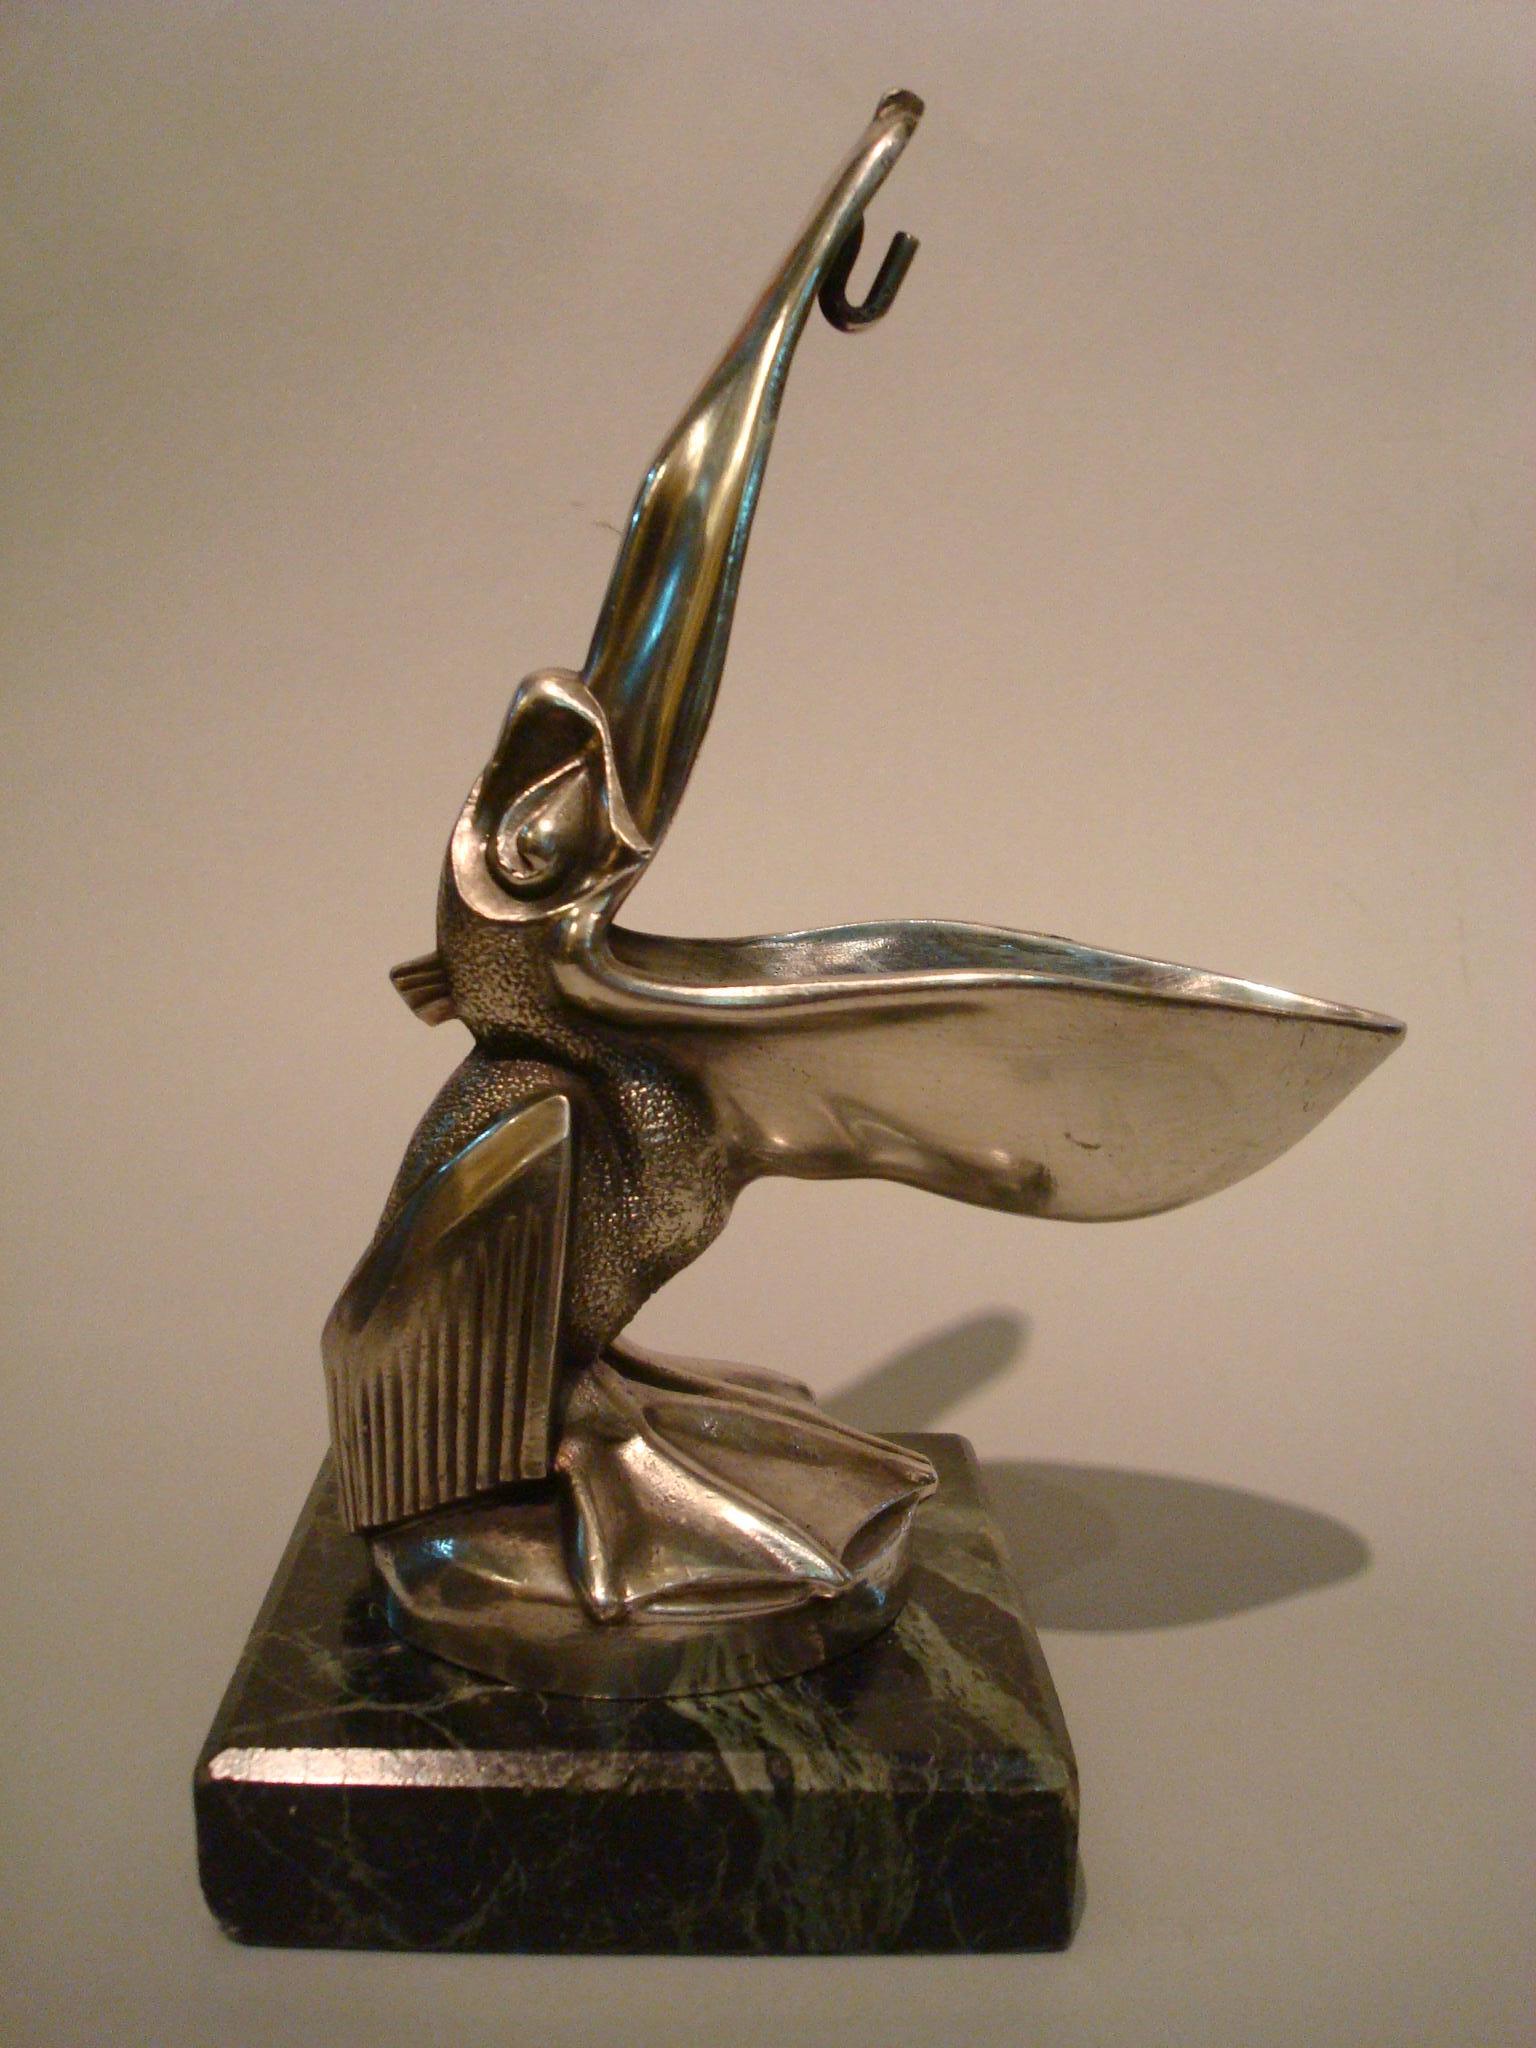 French Art Deco Pelican Le Verrier Sculpture Car Mascot Paperweight Packet Watch Holder For Sale